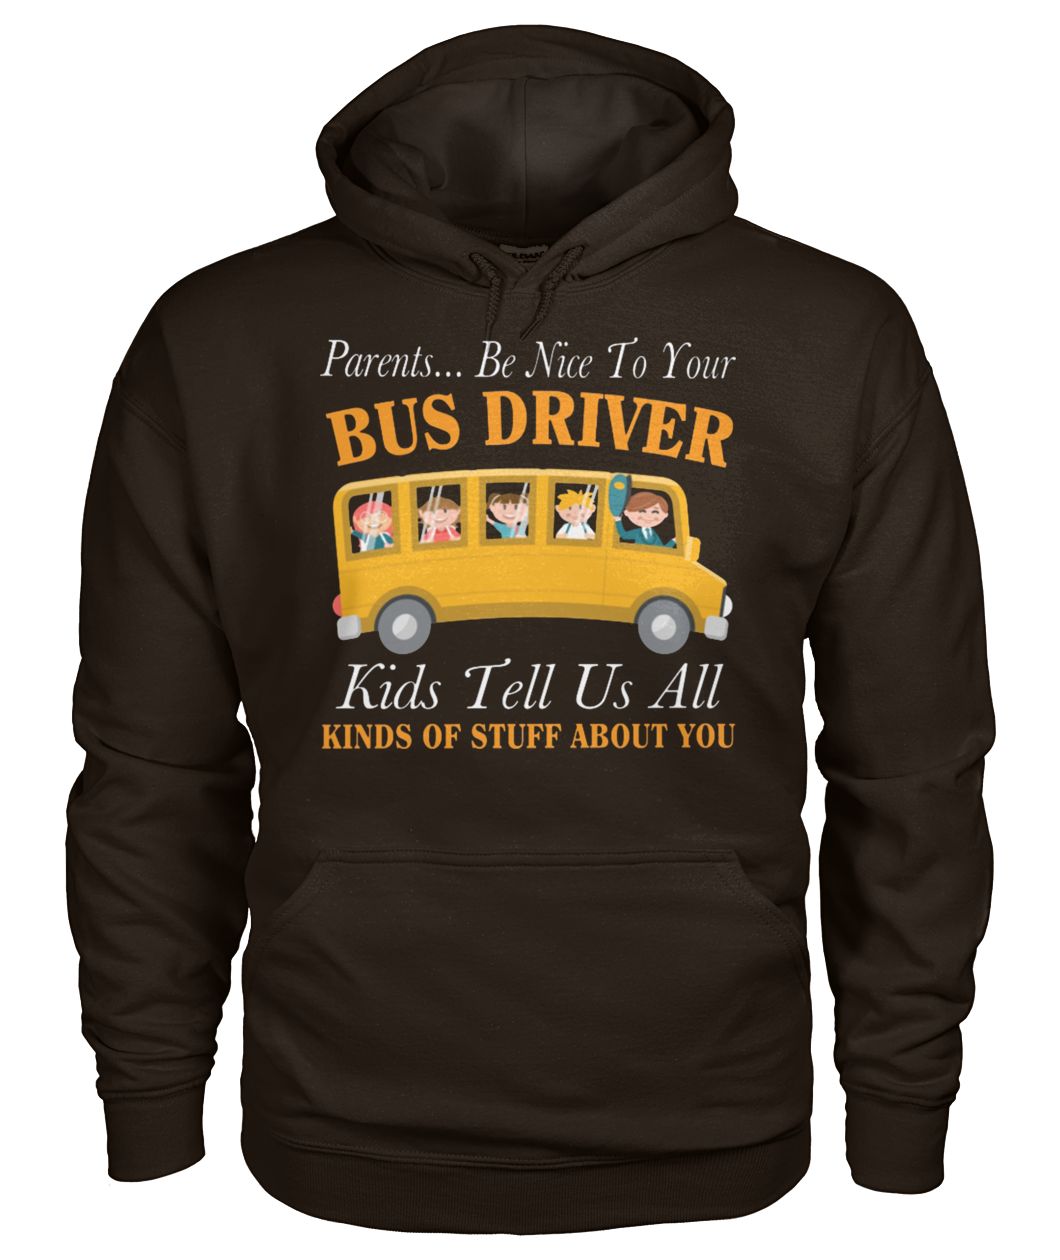 Parents be nice to your bus driver kids tell us all kinds of stuff about you gildan hoodie